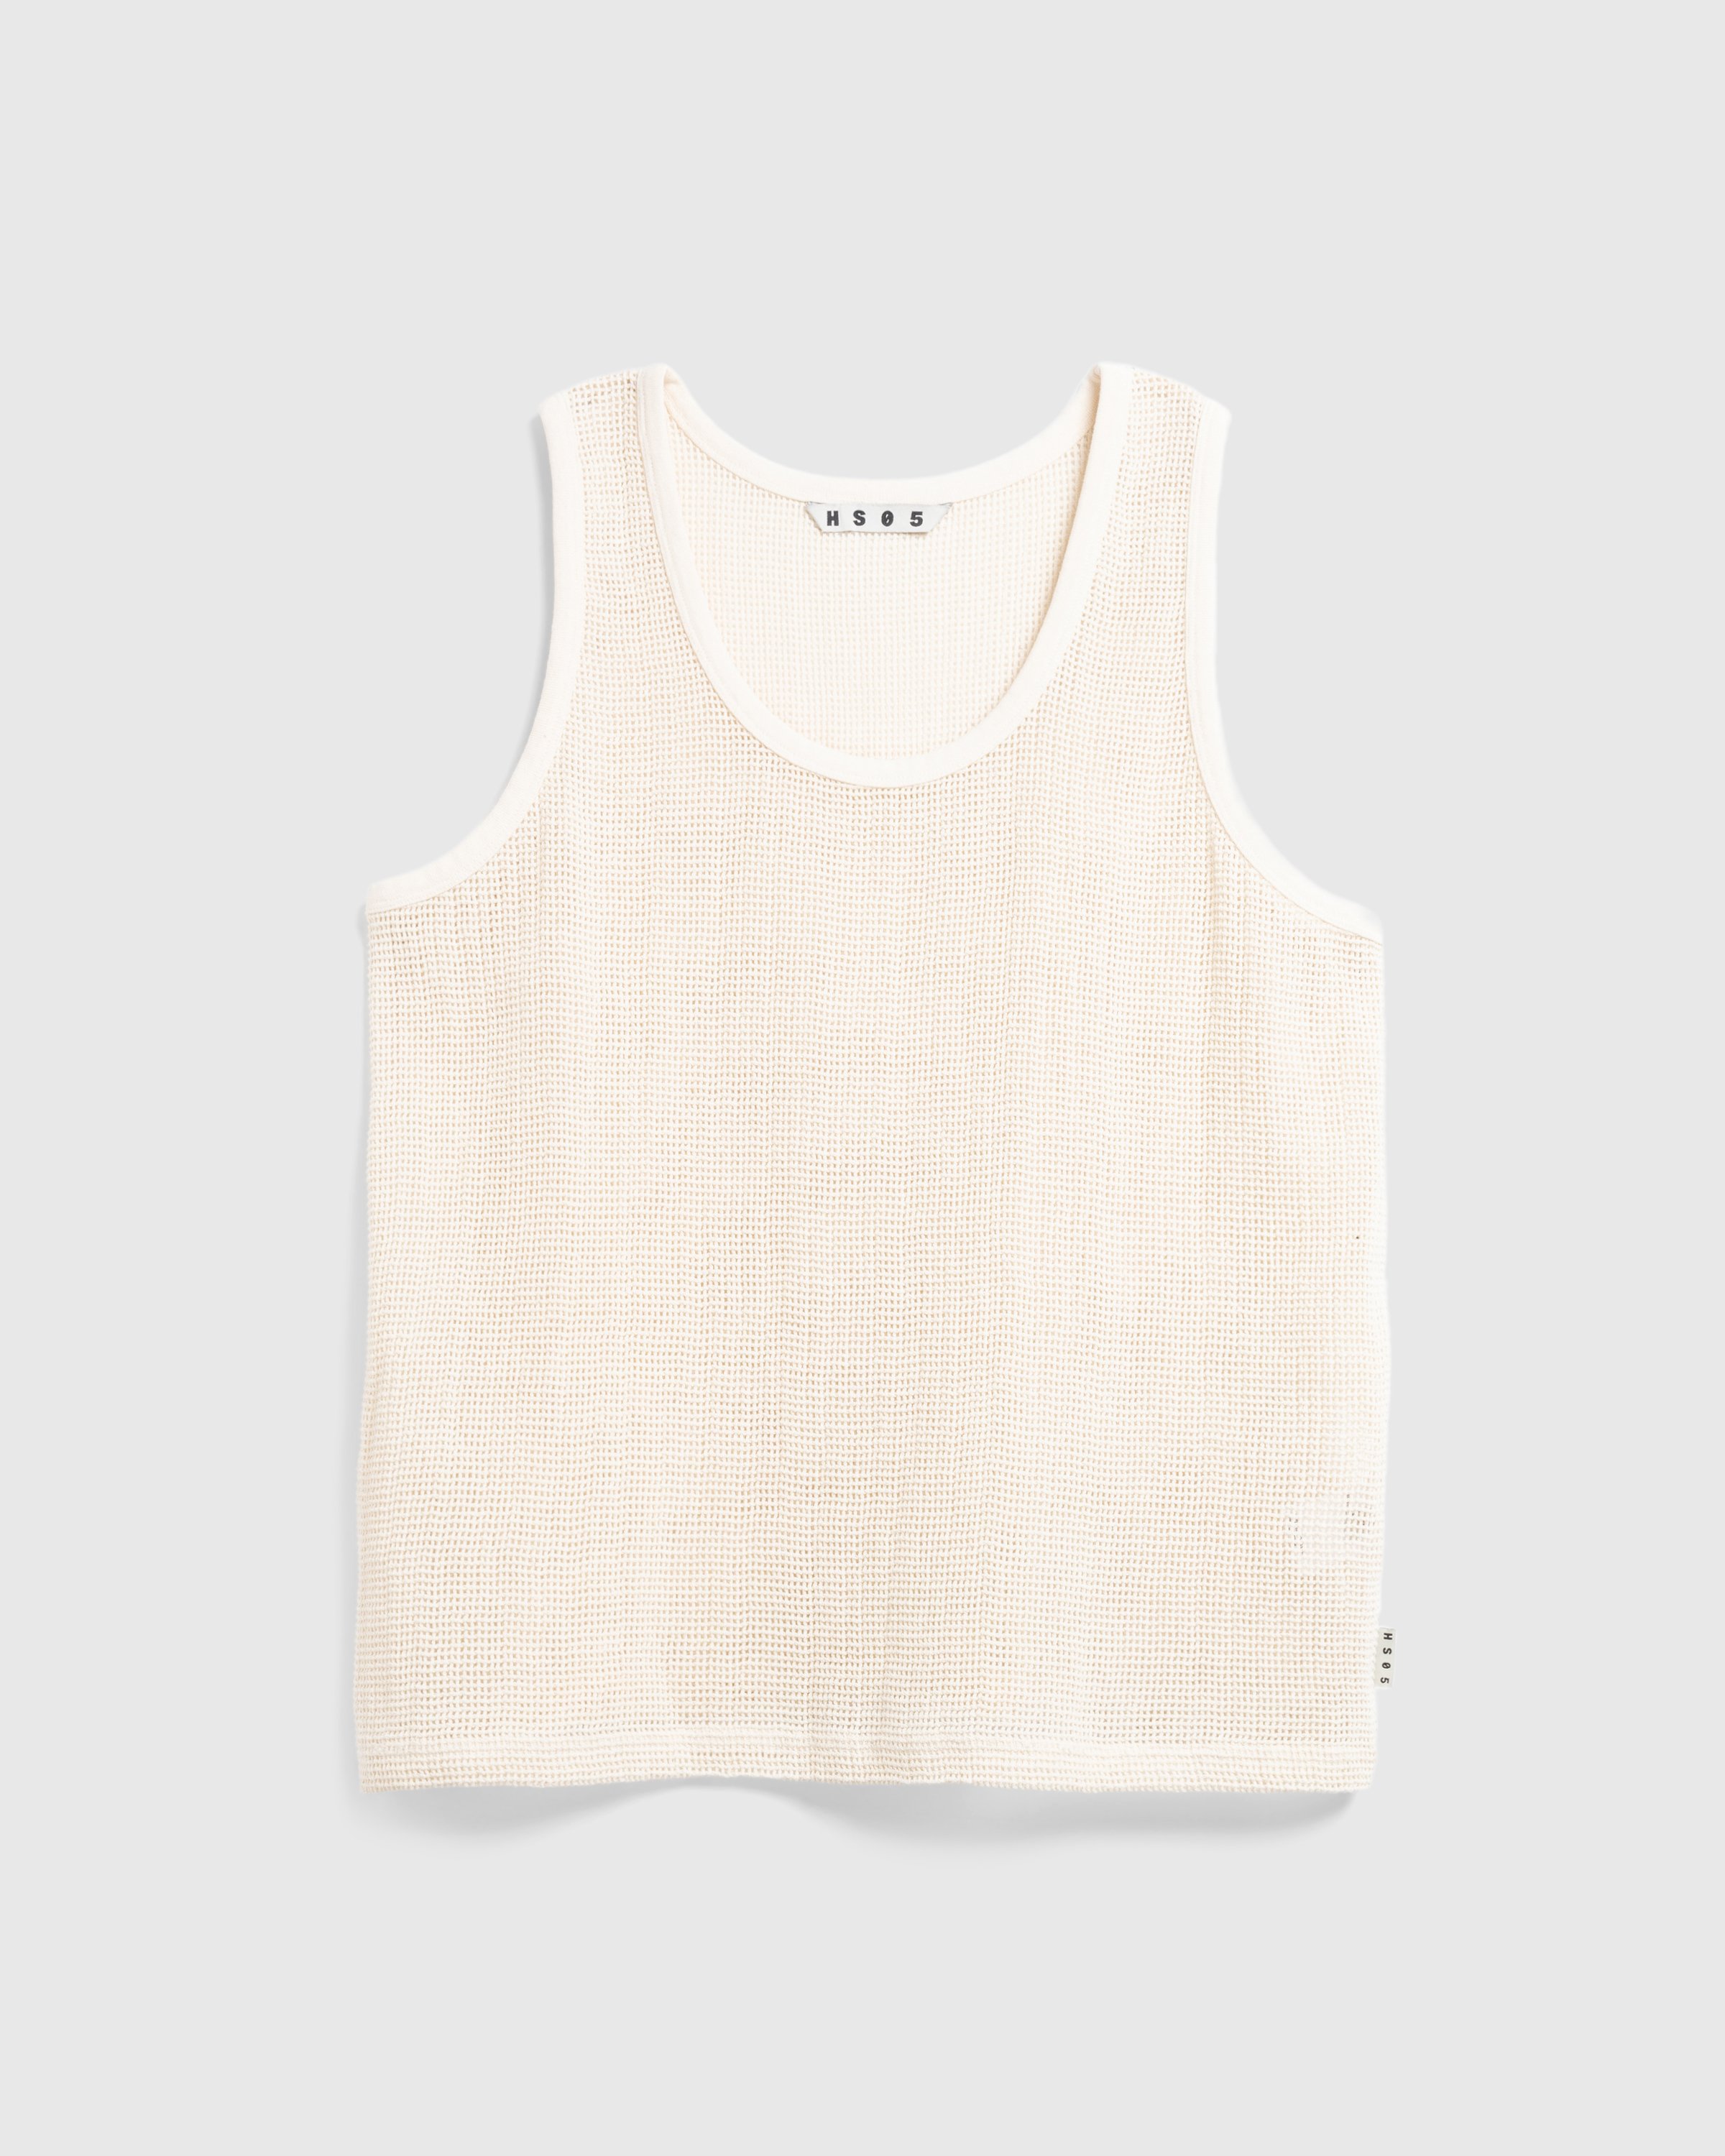 Highsnobiety HS05 - Pigment Dyed Cotton Mesh Tank Top - Clothing -  - Image 1